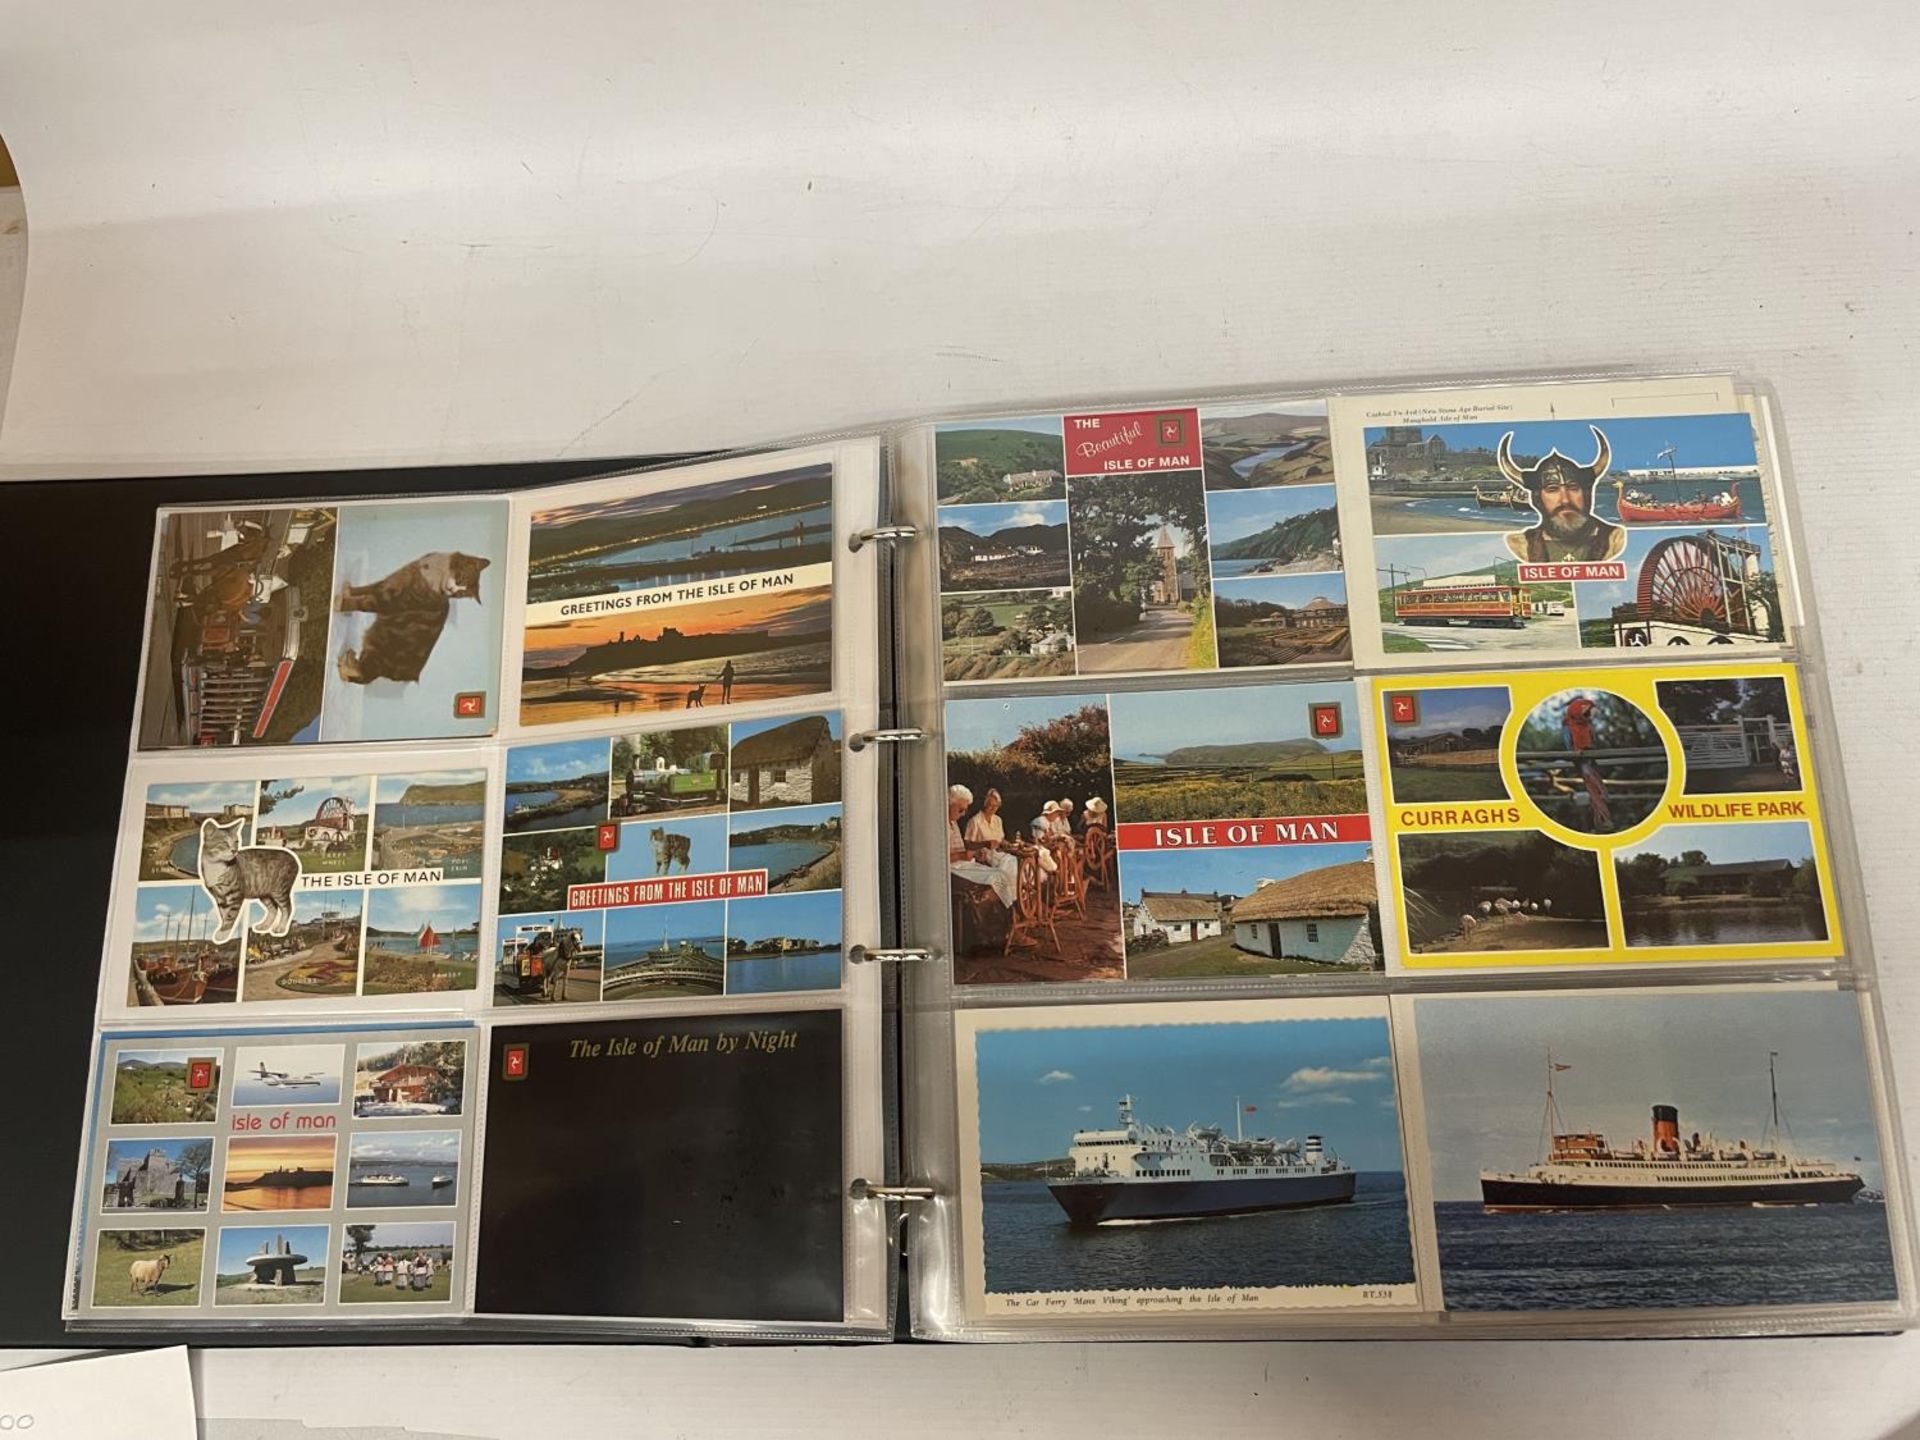 APPROXIMATELY 435 POSTCARDS RELATING TO THE ISLE OF MAN, WALES AND IRELAND IN A FOLDER